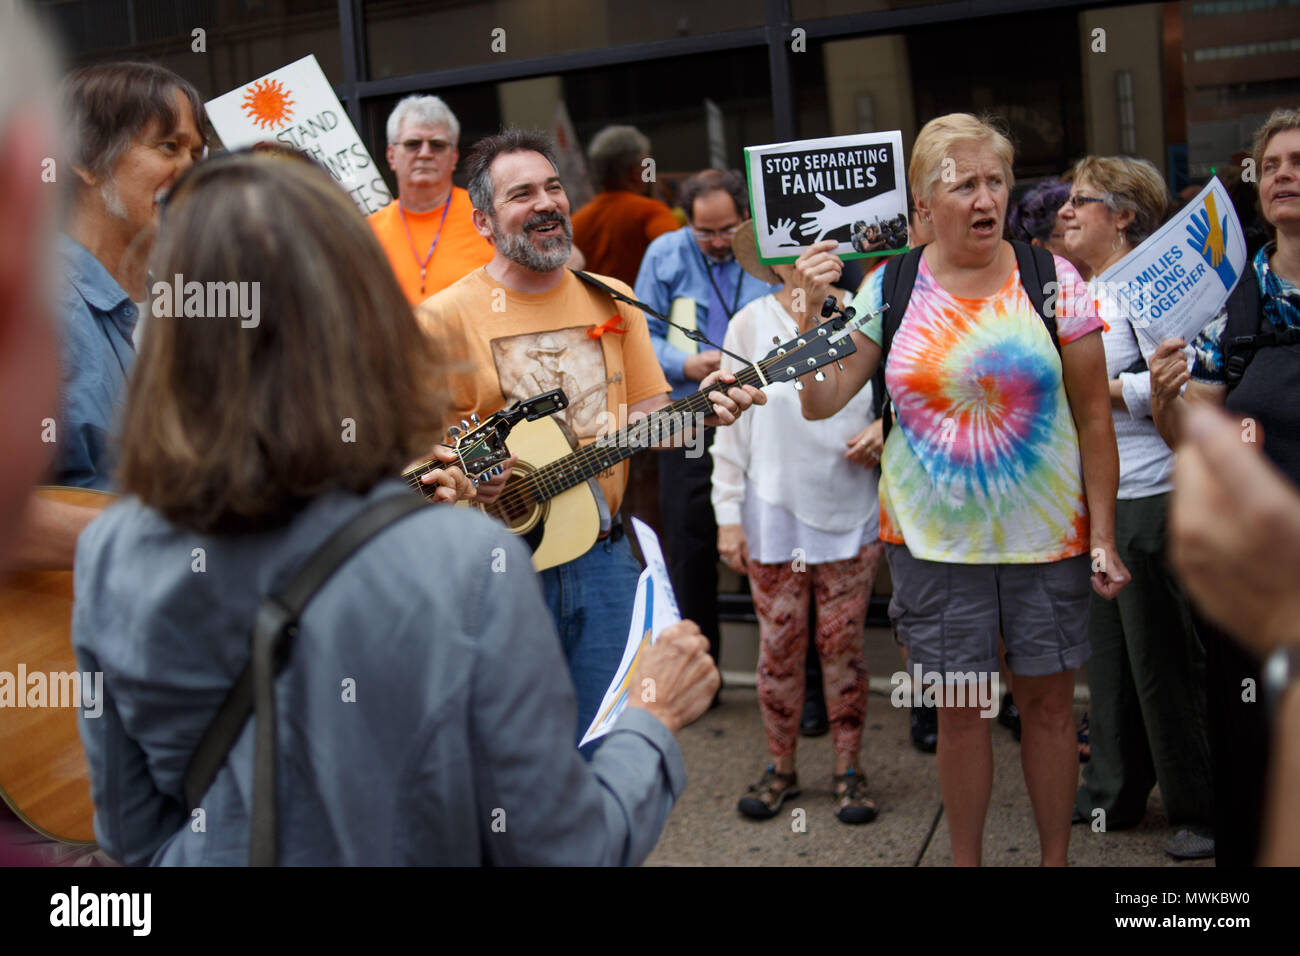 Philadelphia, United States. 01st June, 2018. Protestors sing and play instruments during a rally near the city's ICE (Immigration and Customs Enforcement) office, organized by the ACLU in opposition to new Trump administration policies which separate children entering the country from their parents or accompanying family members. Credit: Michael Candelori/Pacific Press/Alamy Live News Stock Photo